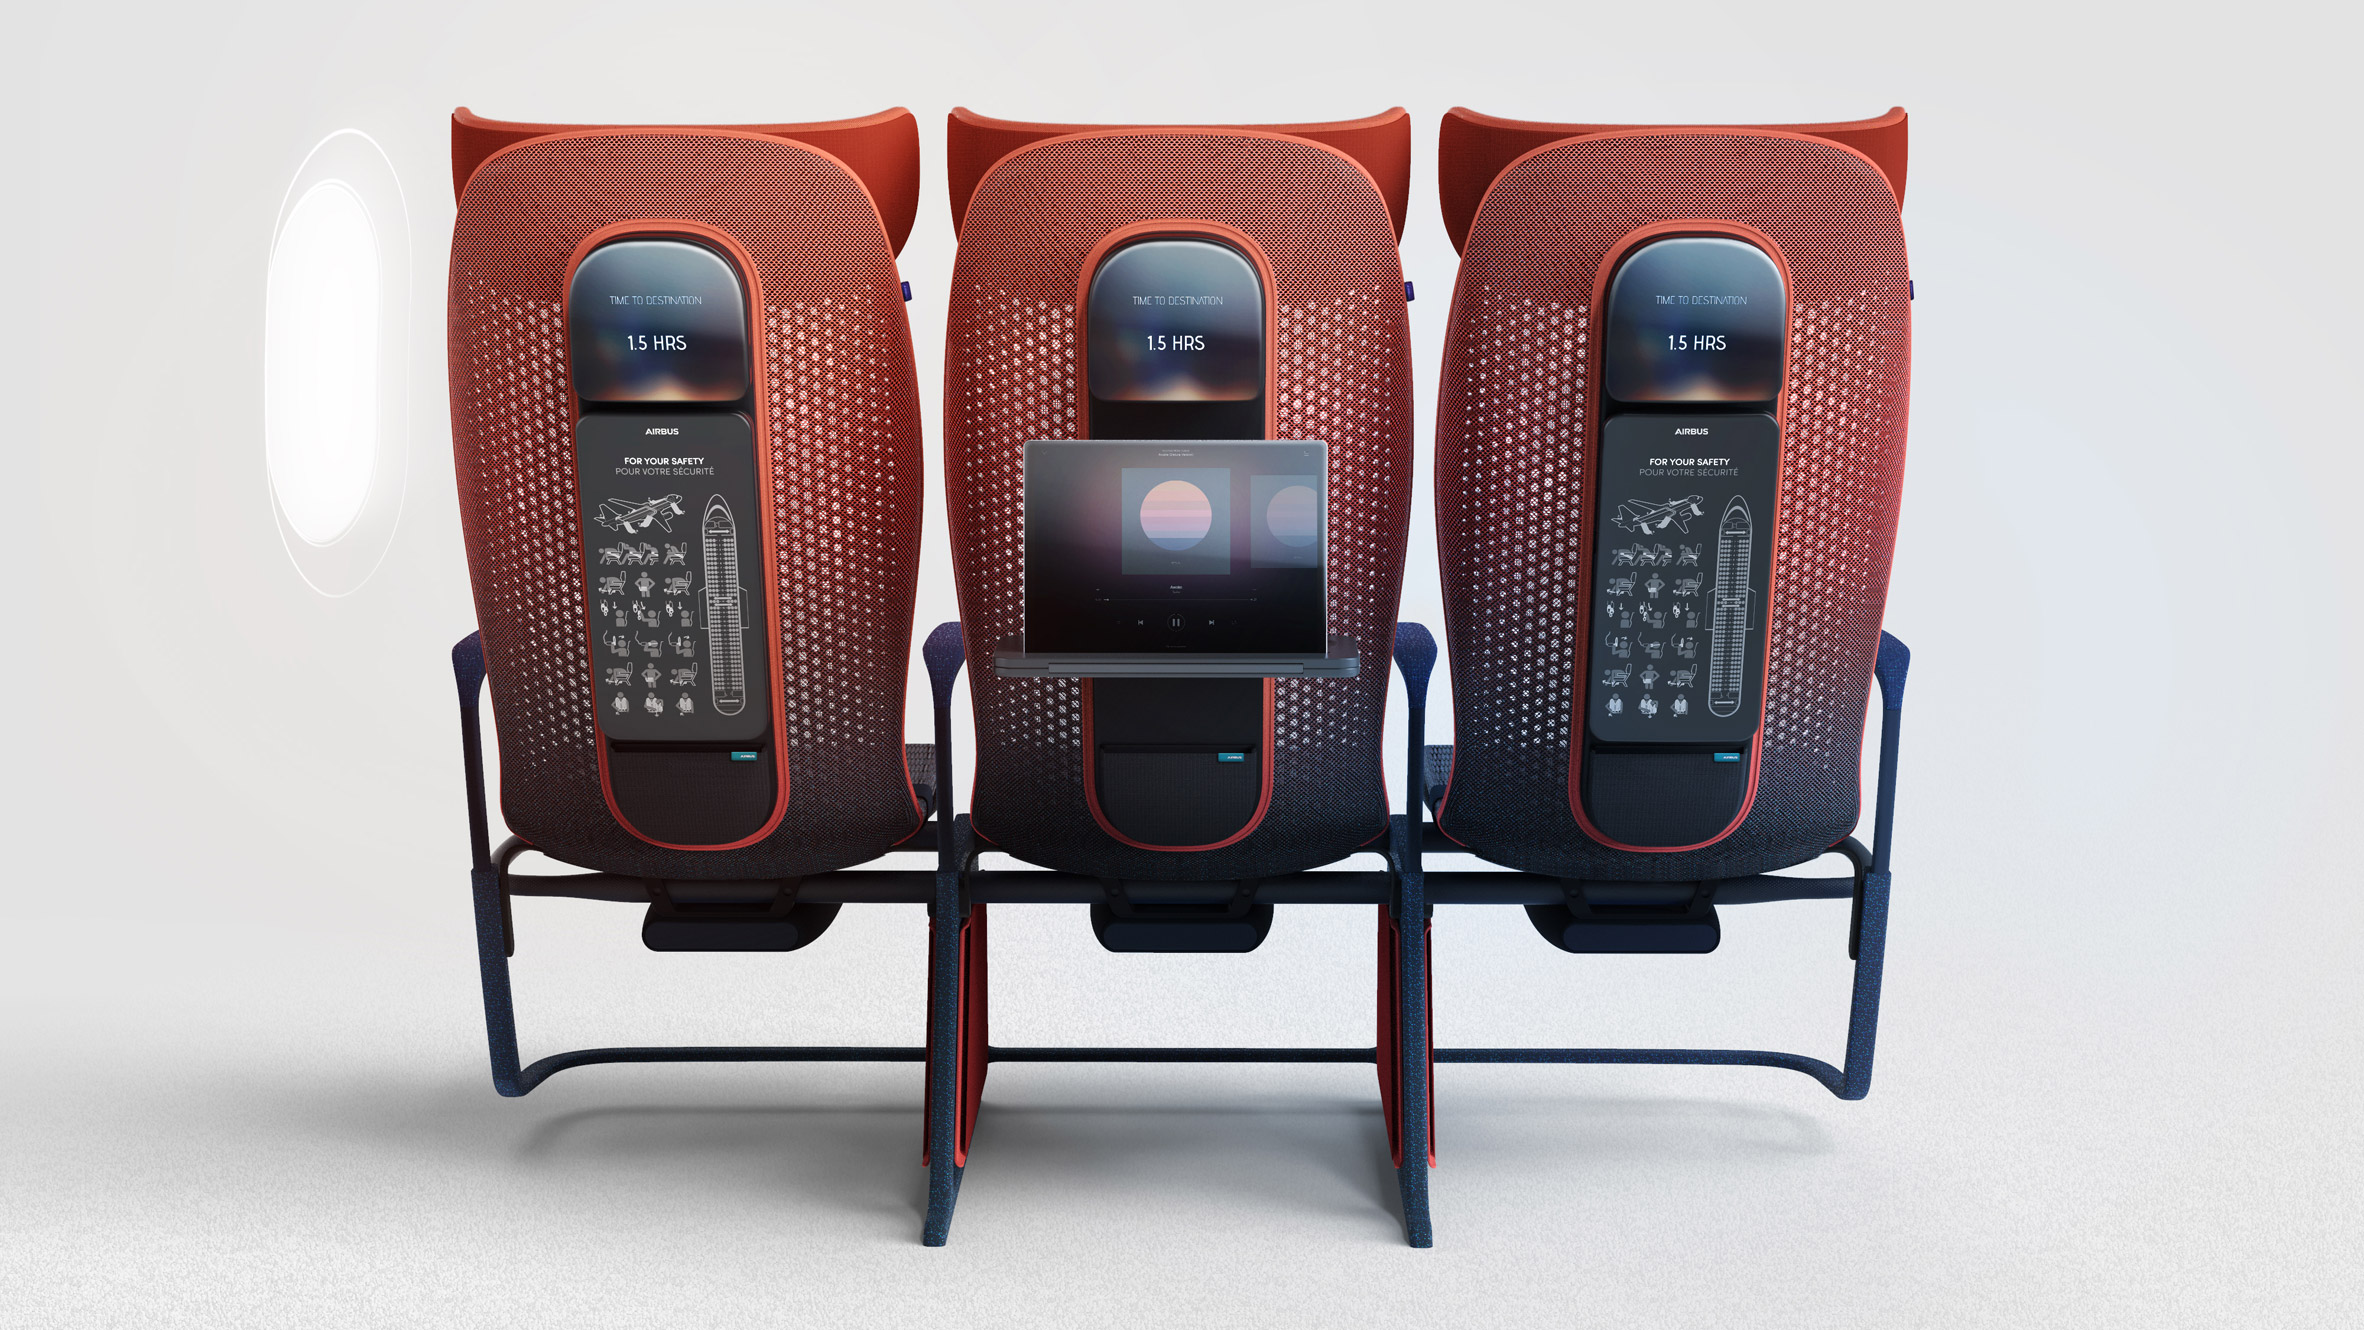 Layer's smart Move seating for Airbus adapts to the passengers needs